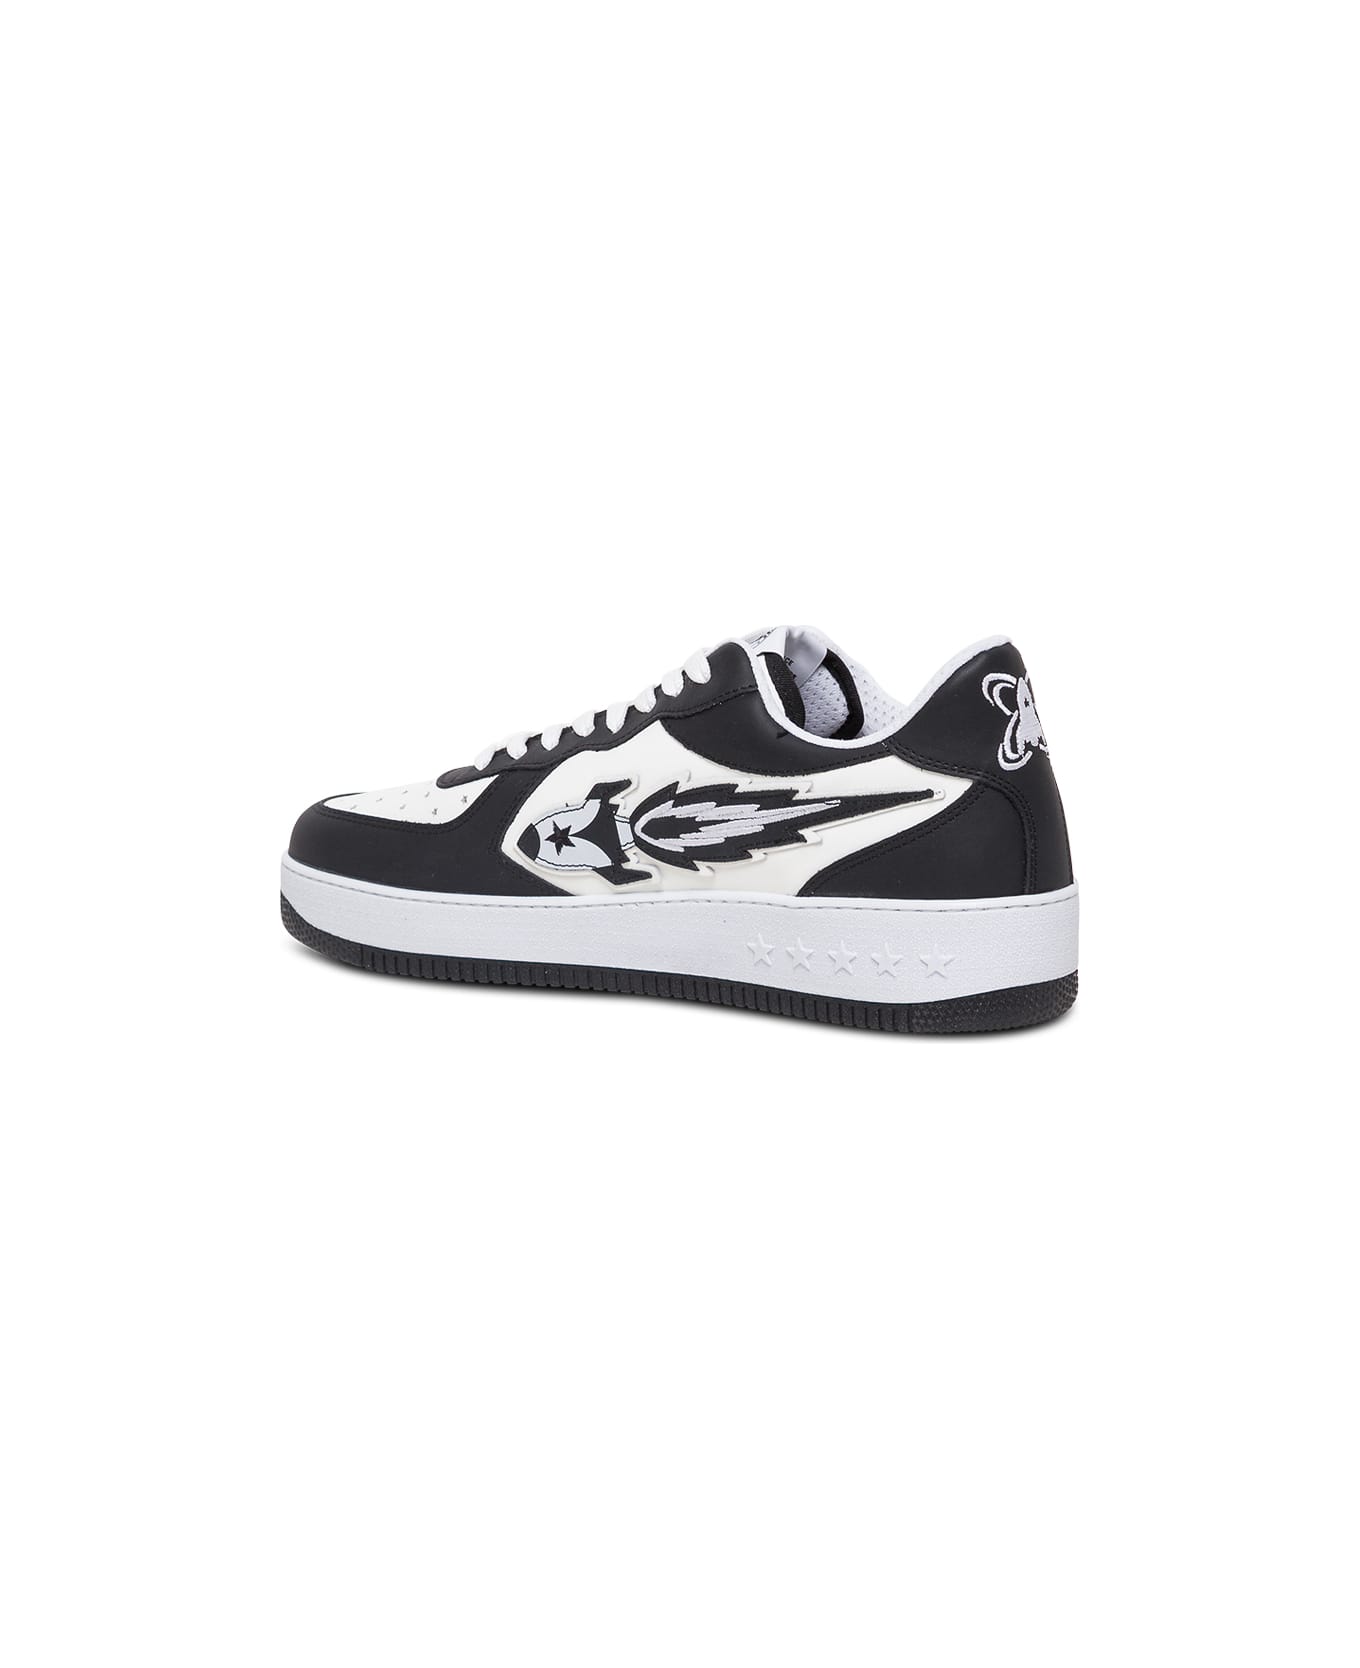 Enterprise Japan White And Black Leather Low Sneakers - White/black